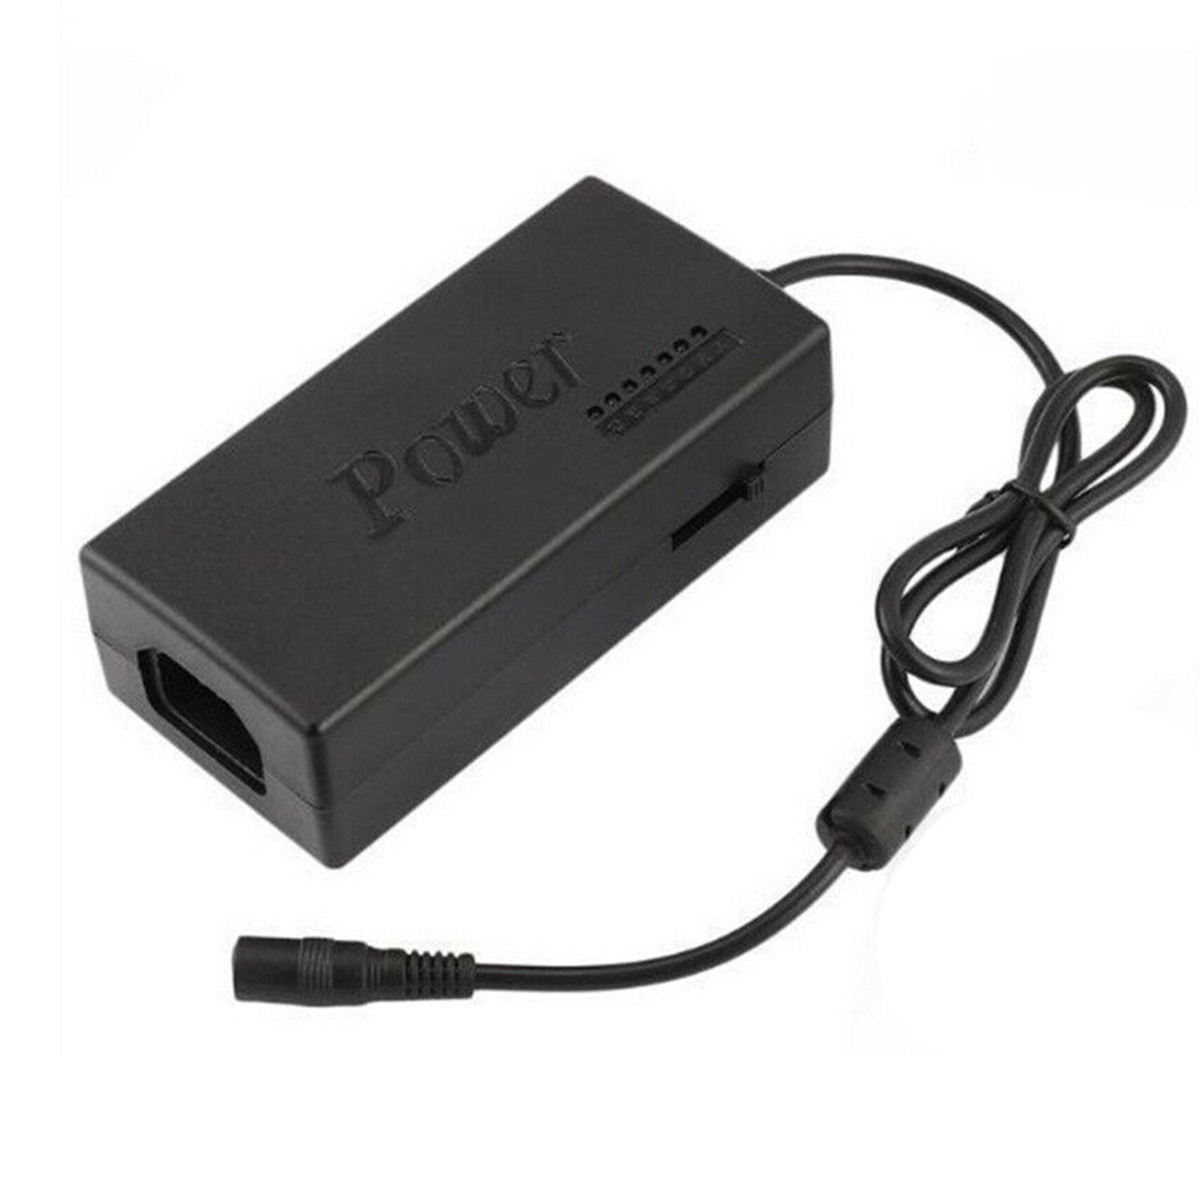 

AC 100V-240V DC 24V 4A 96W Power Supply Charger Converter Adapter For Notebook